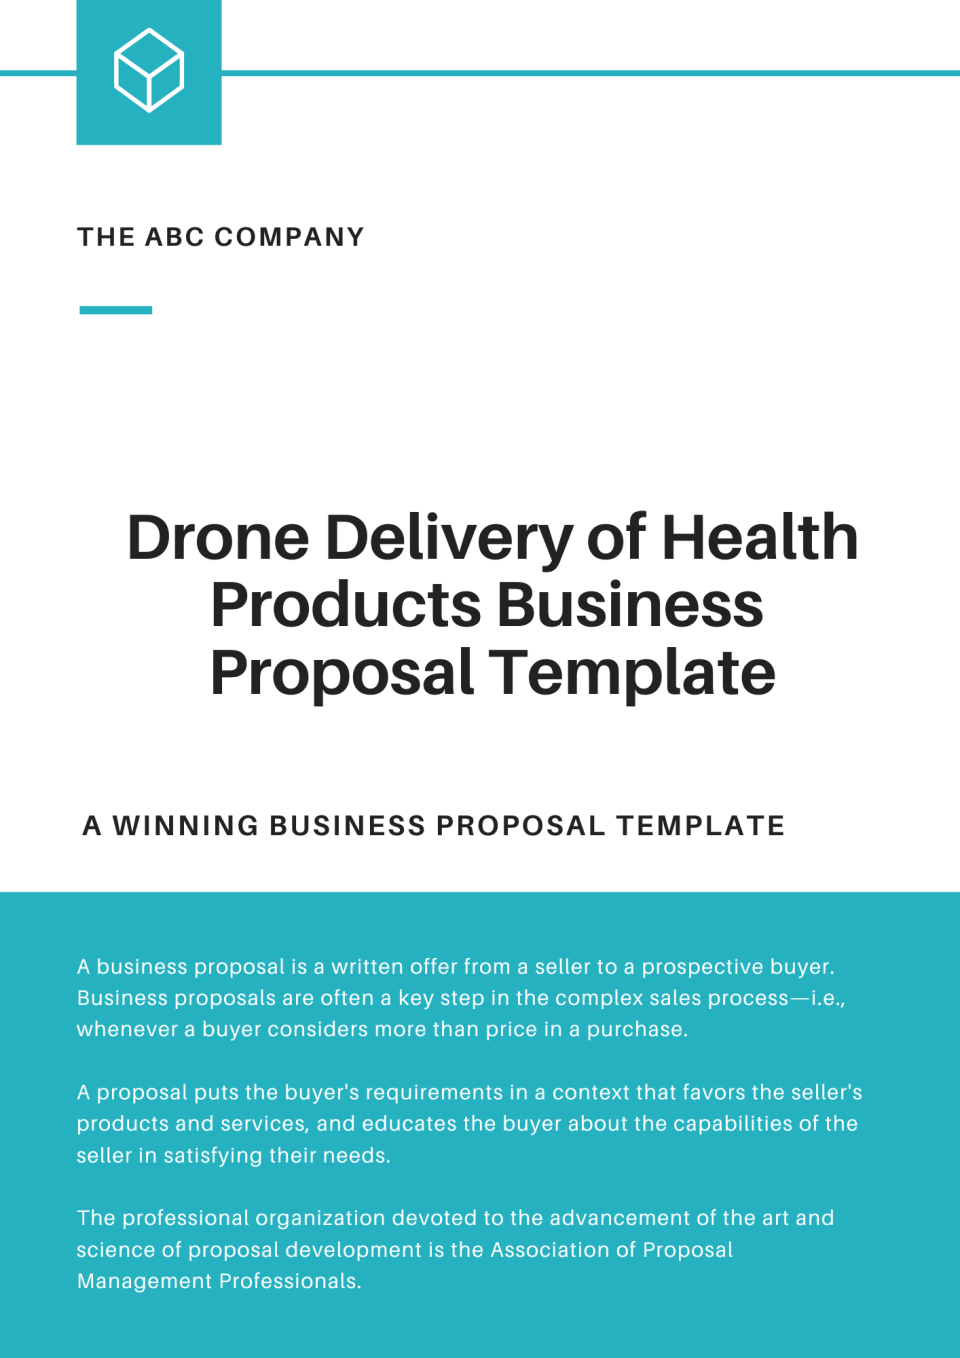 Drone Delivery of Health Products Business Proposal Template